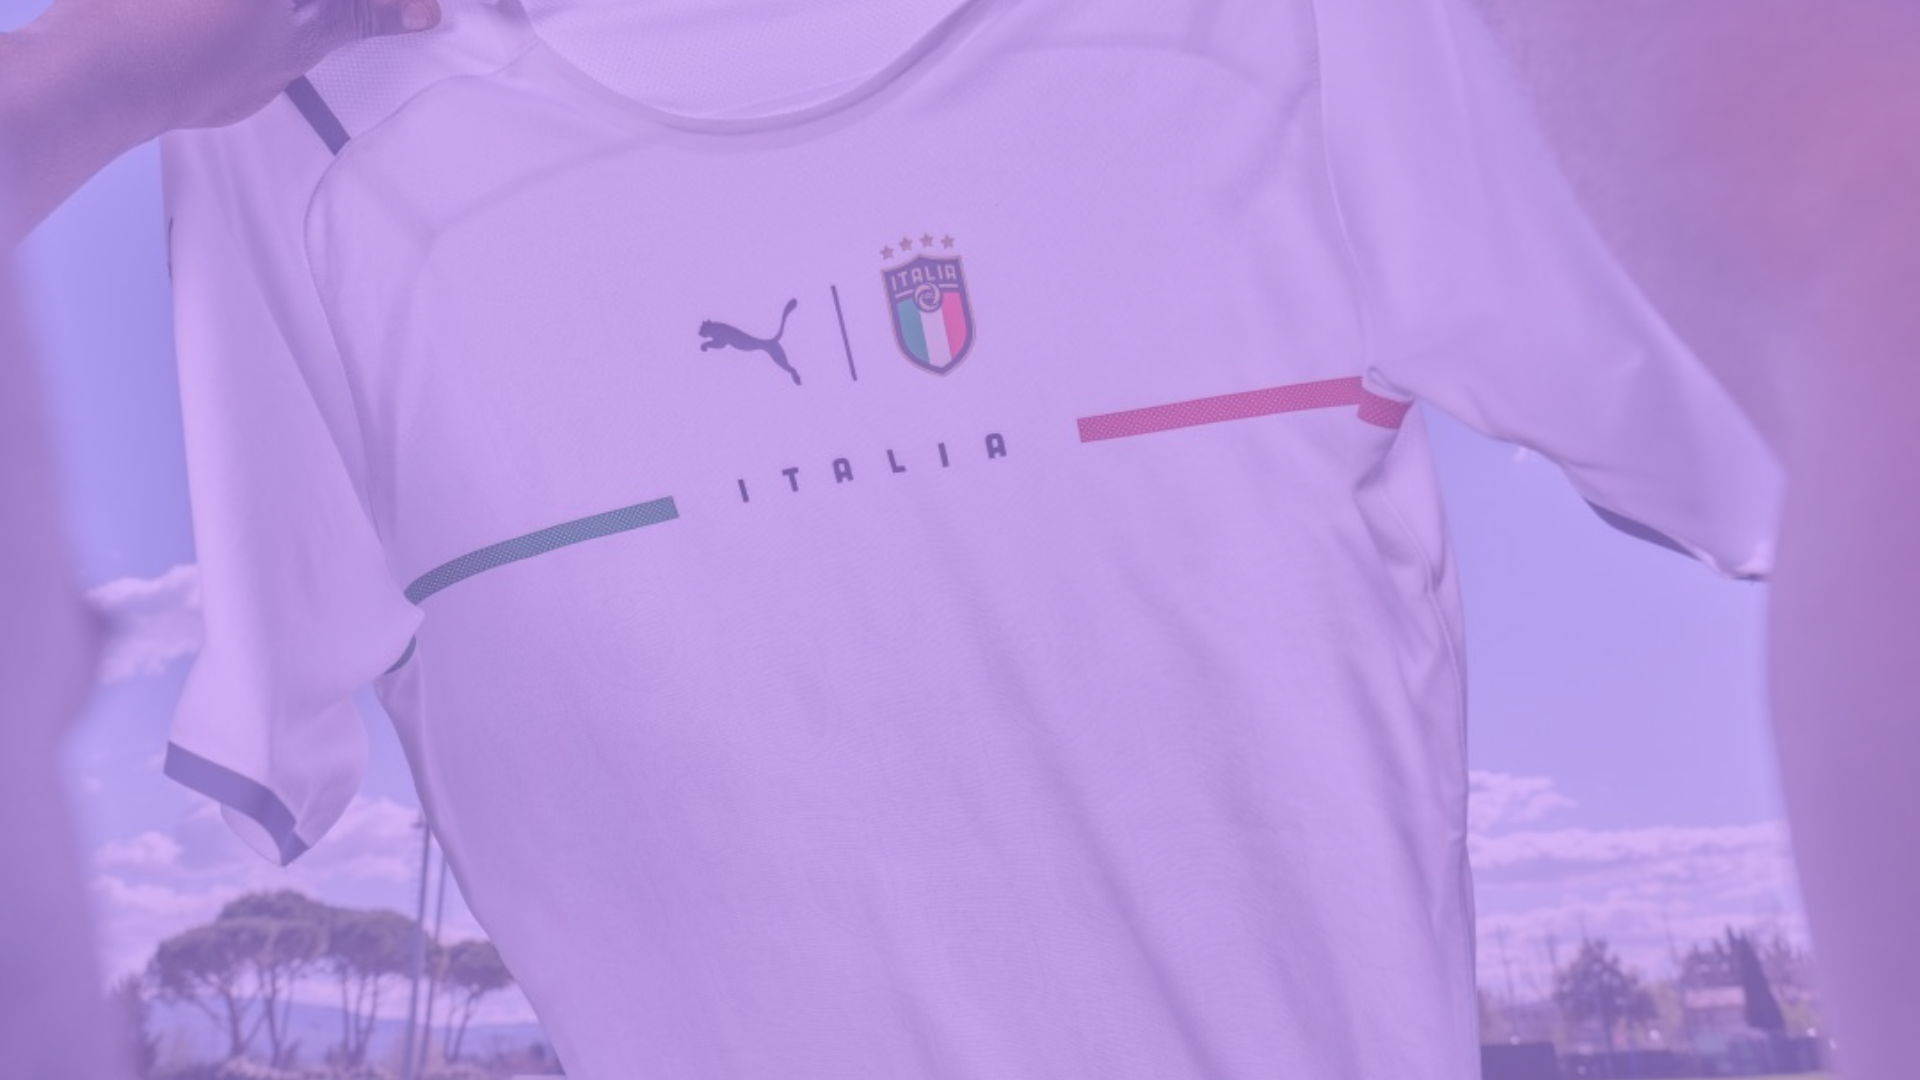 The Puma international shirts aren’t as bad as you think